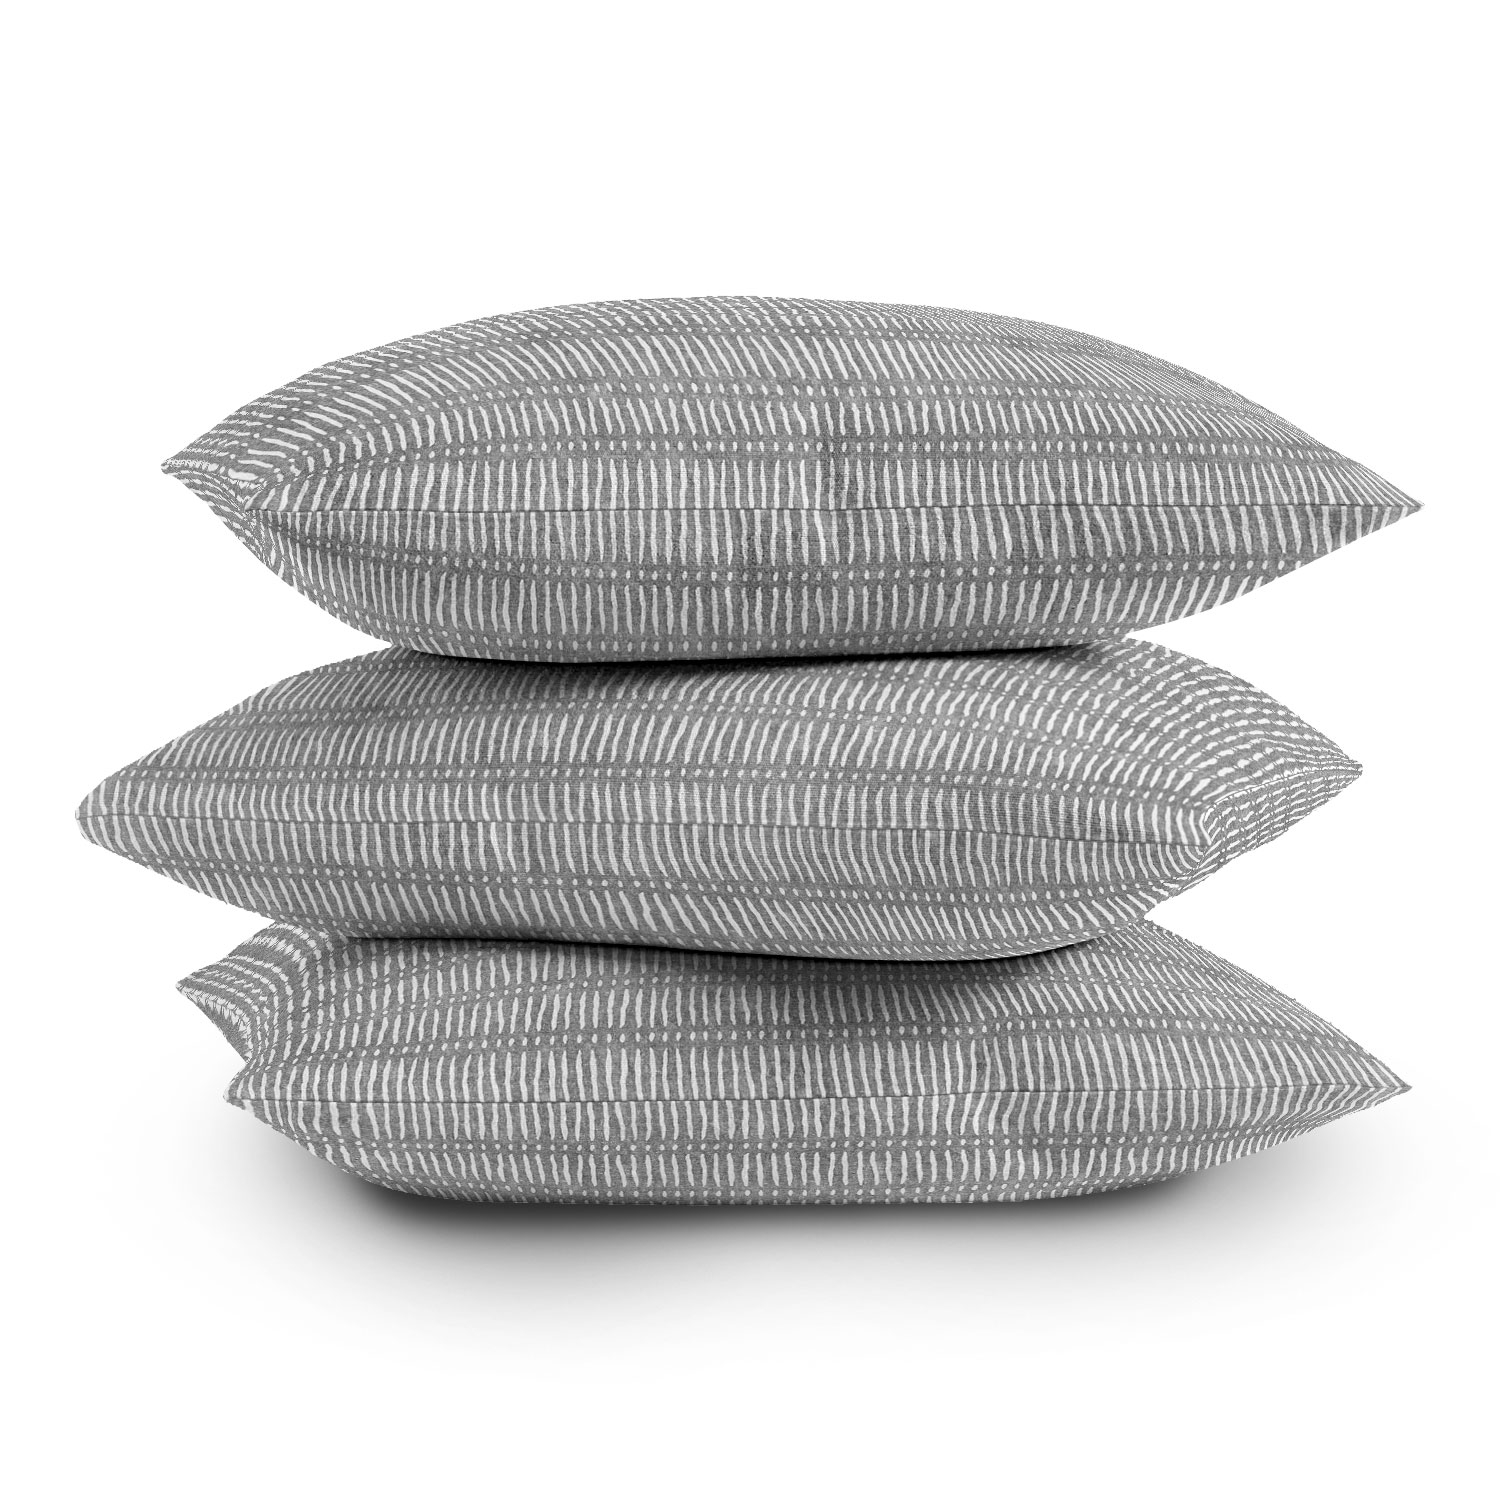 Mud Cloth Dash Gray by Little Arrow Design Co - Outdoor Throw Pillow 20" x 20" - Image 3